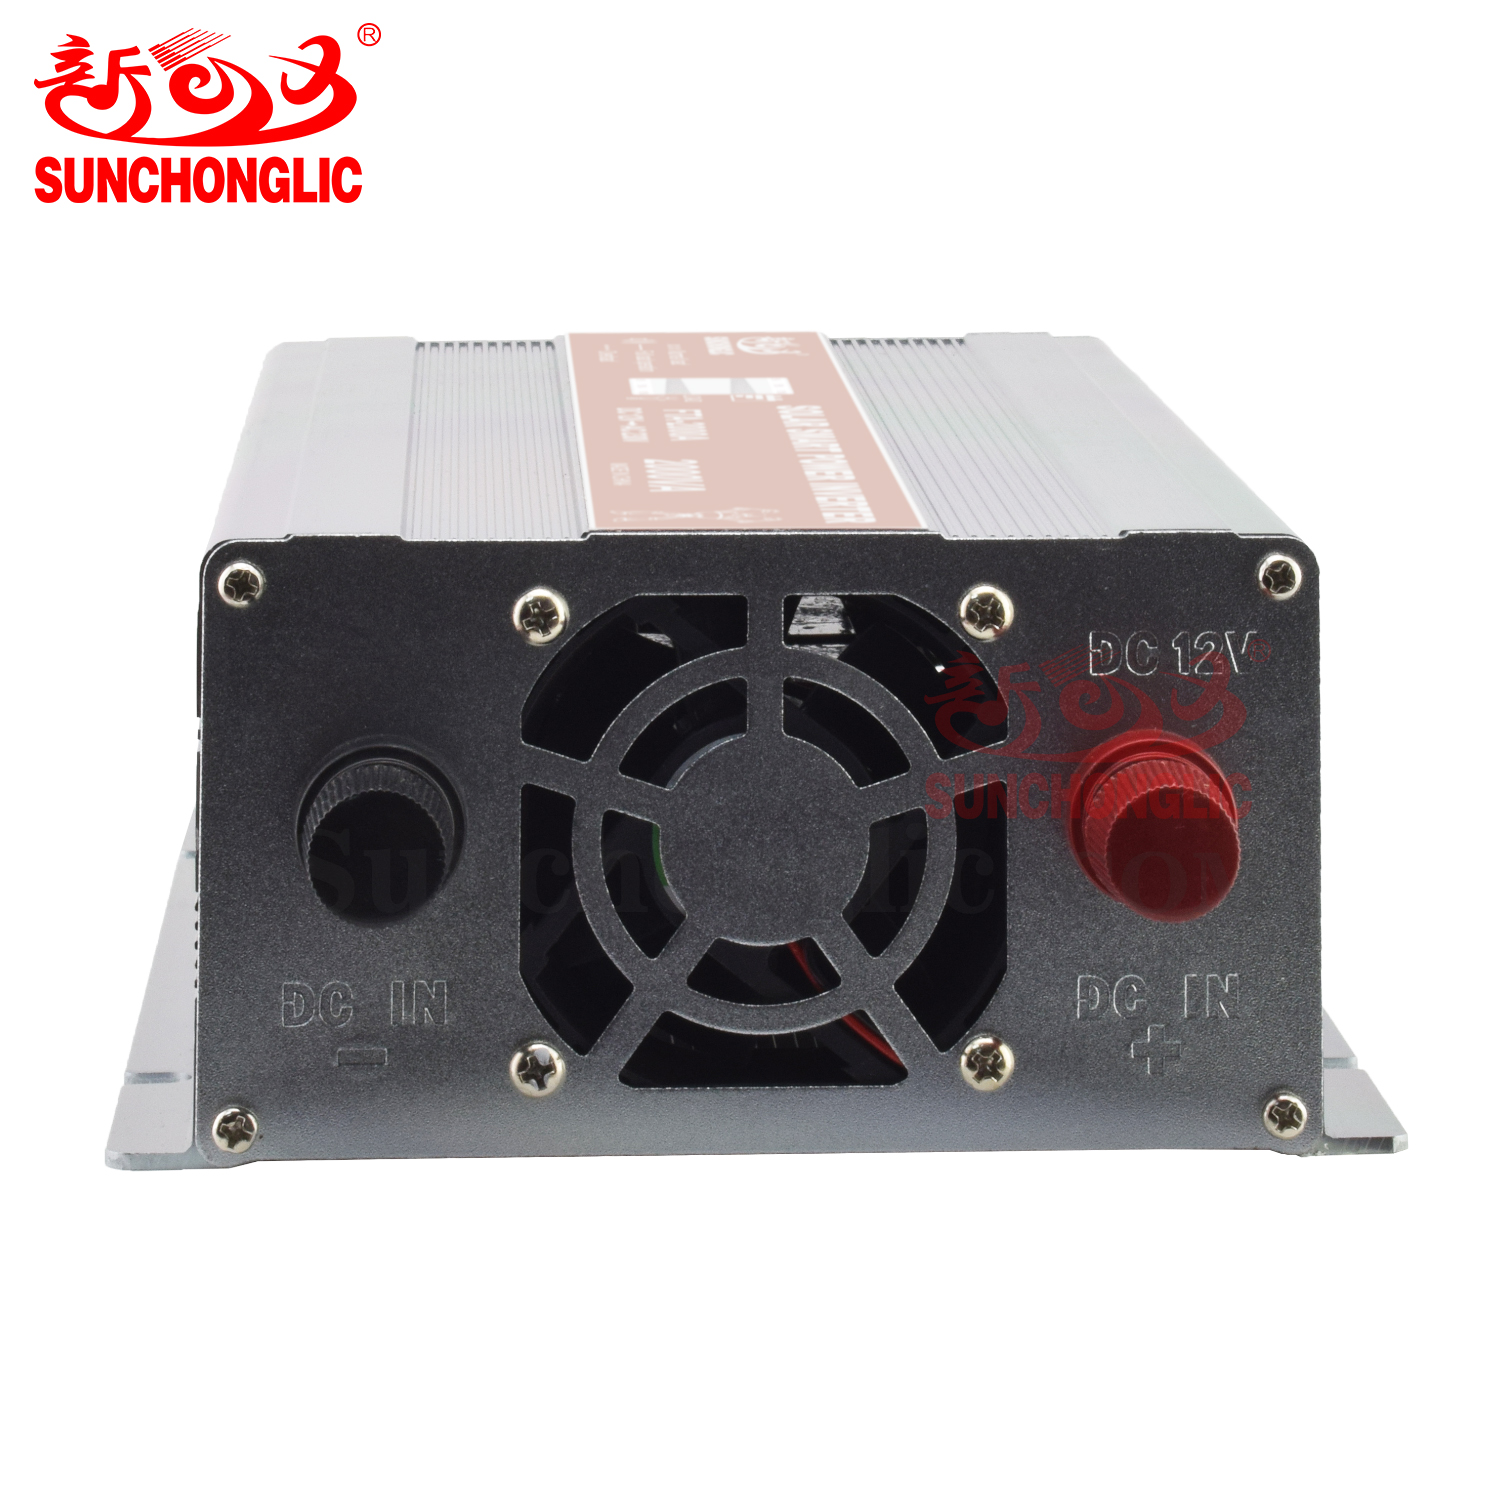 China Customized Low Frequency inverter 12v 220v 2000w Manufacturers,  Suppliers, Factory - Buy Discount Low Frequency inverter 12v 220v 2000w -  Foshan Top One Power Technology Co.,Ltd